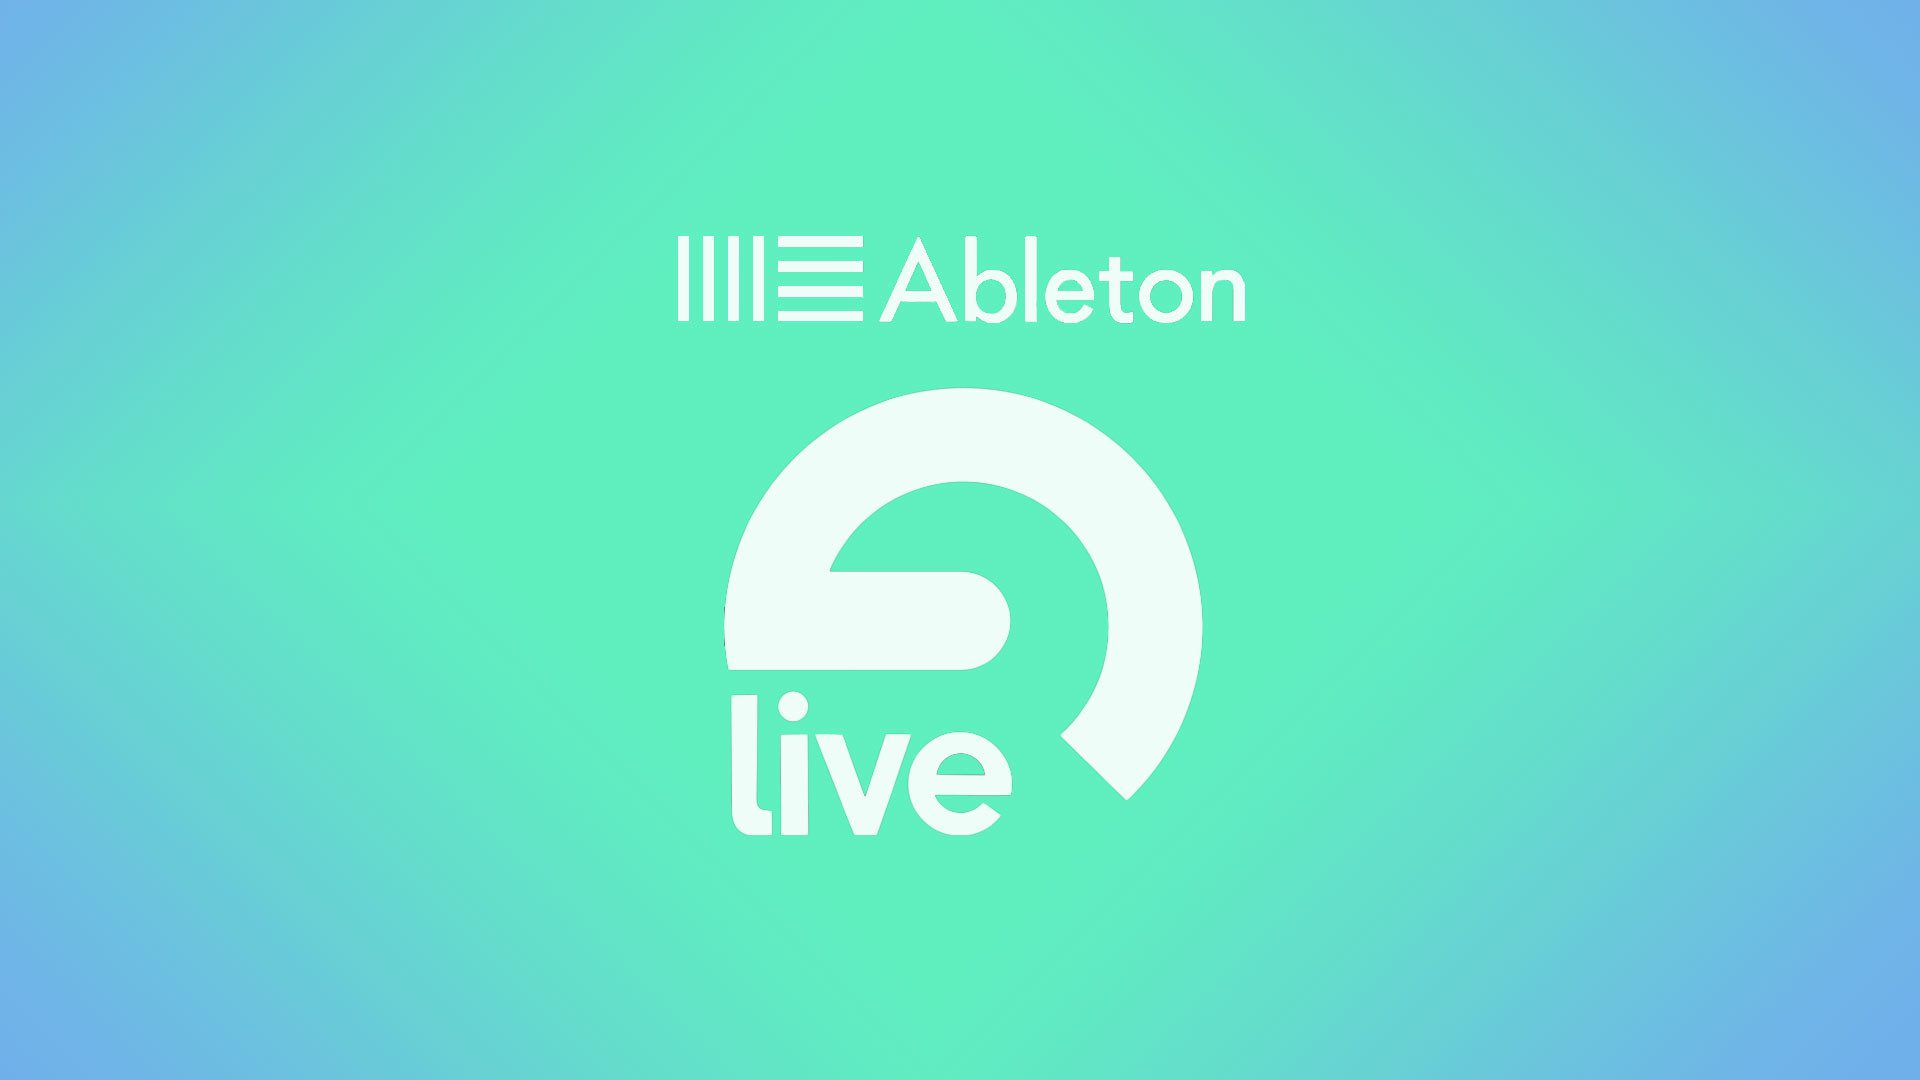 Ableton live 9 for windows 7 free download how to download video from oreilly